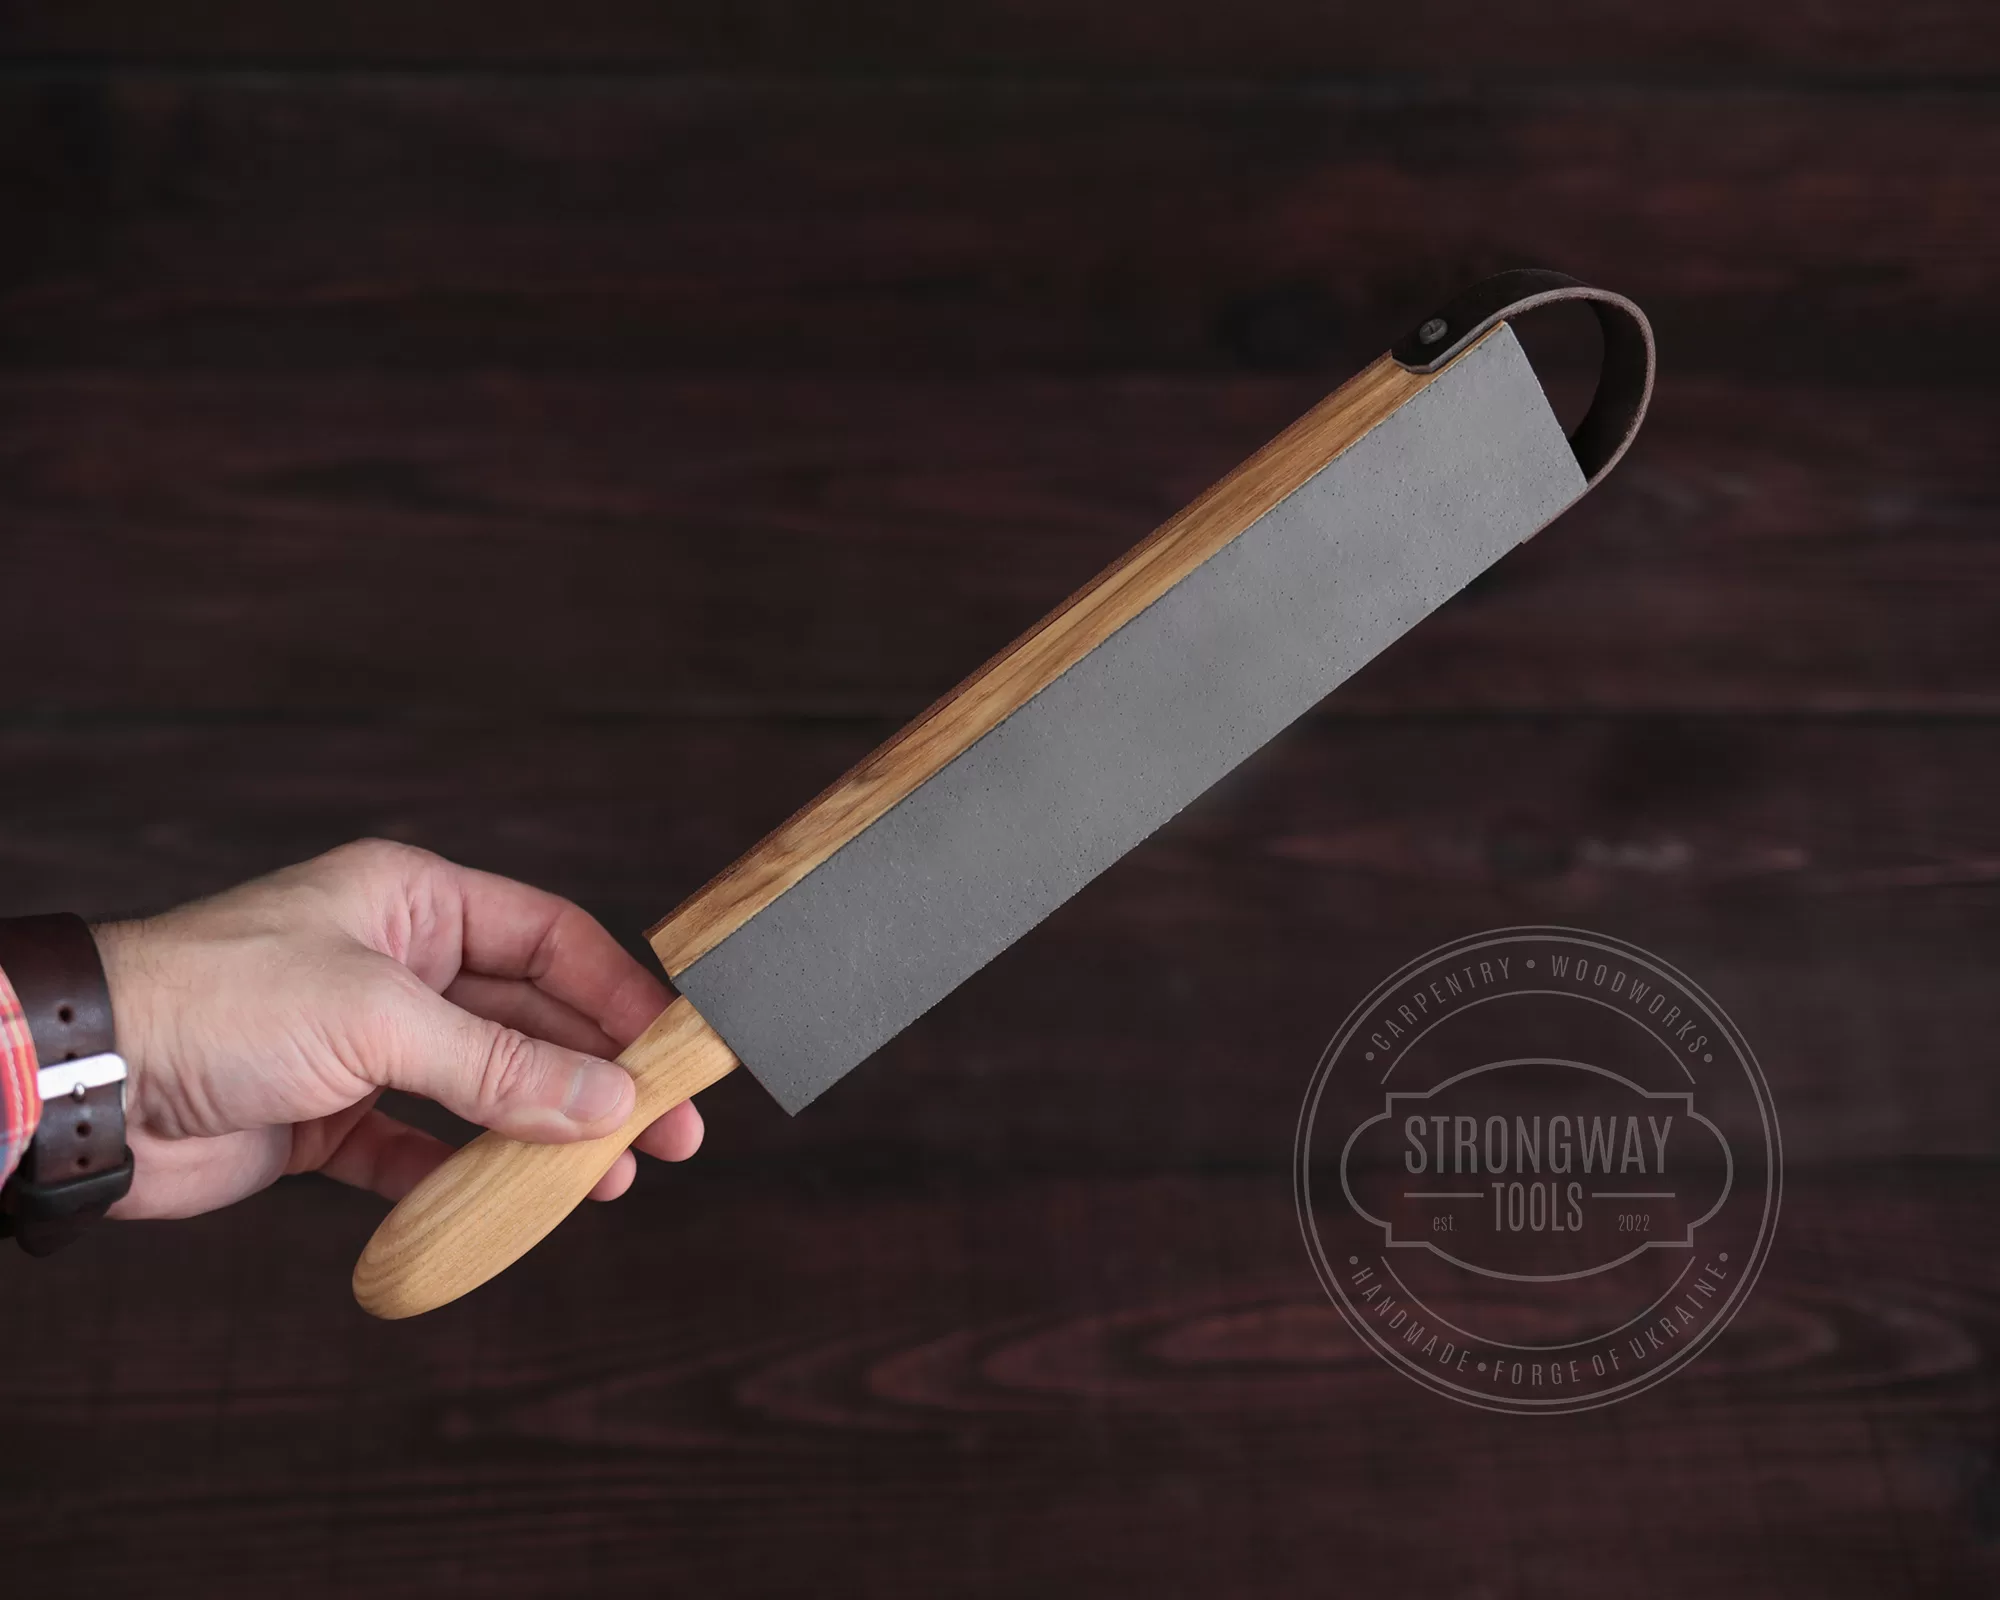 Double-side leather strop for sharpening - The Spoon Crank